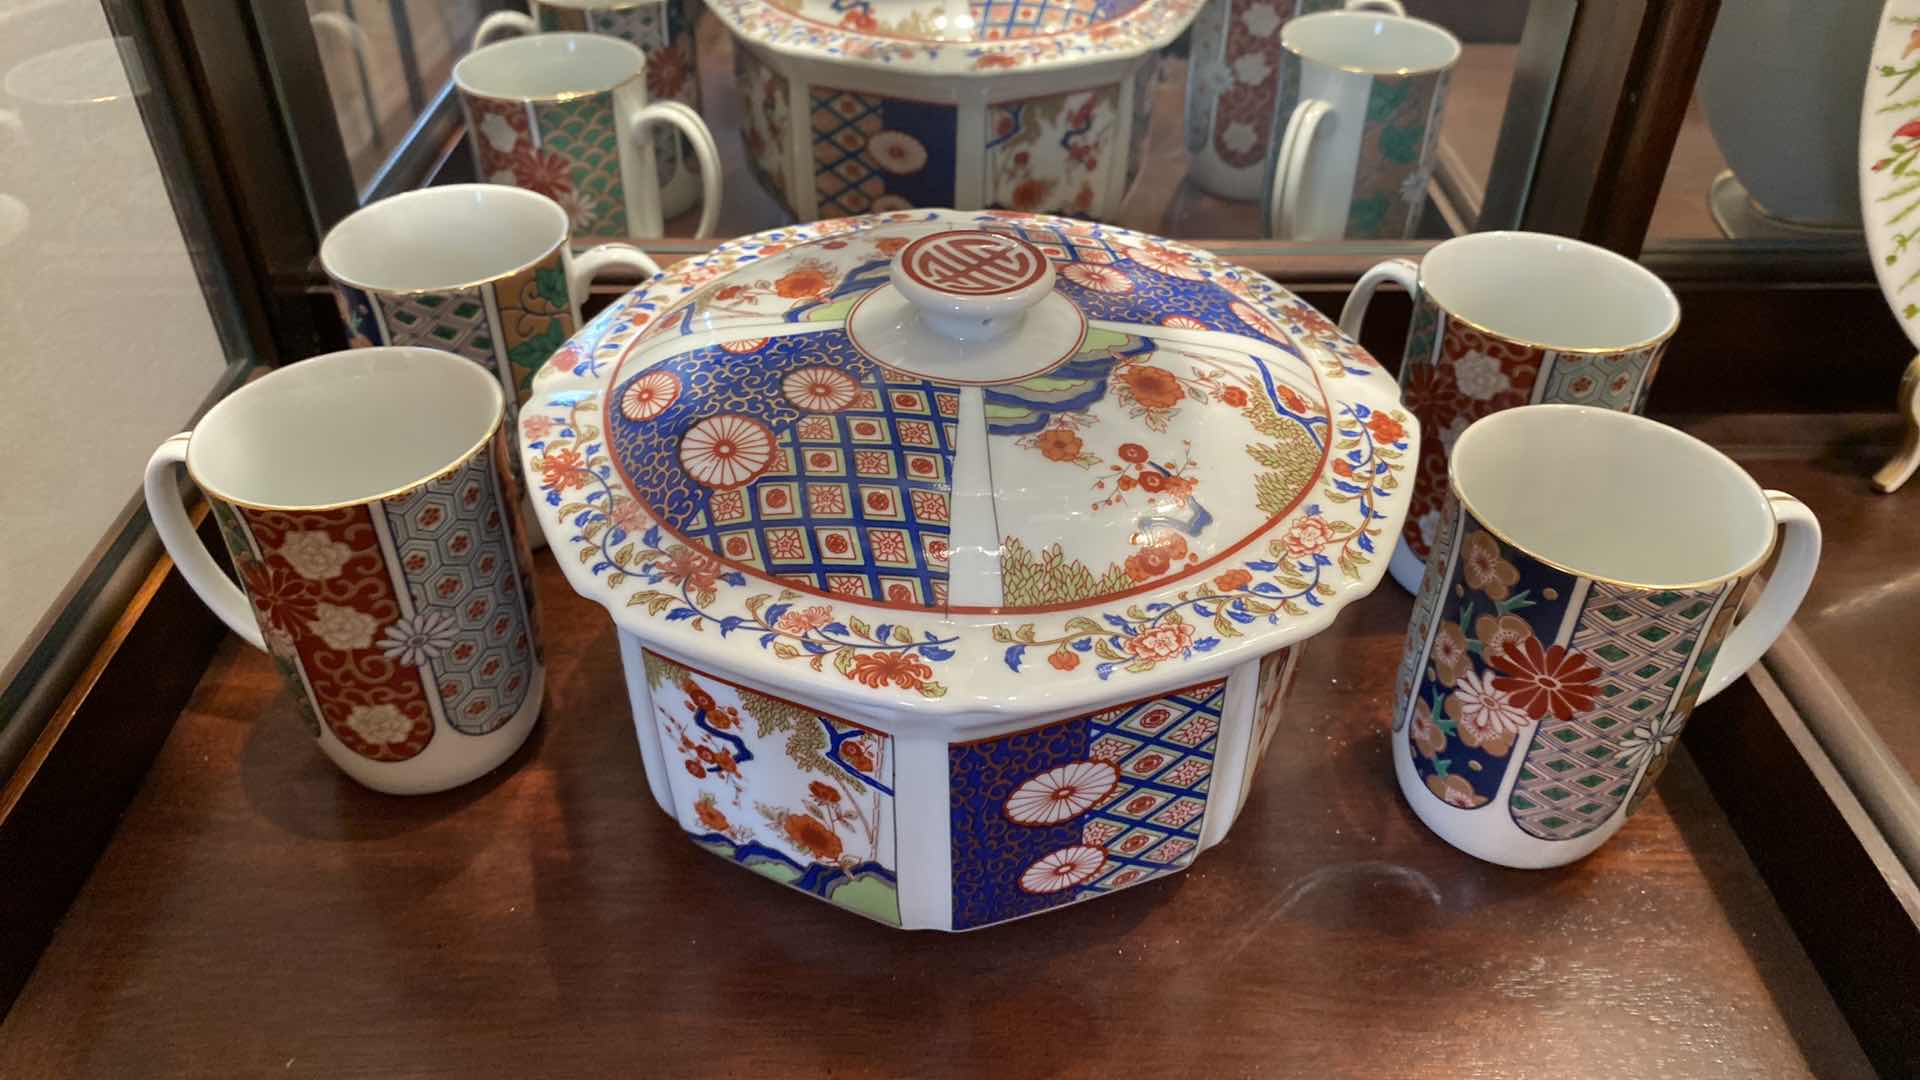 Photo 1 of CHINESE IMARI STYLE COVERED PORCELAIN DISH AND 4 CUPS FROM GUMPS